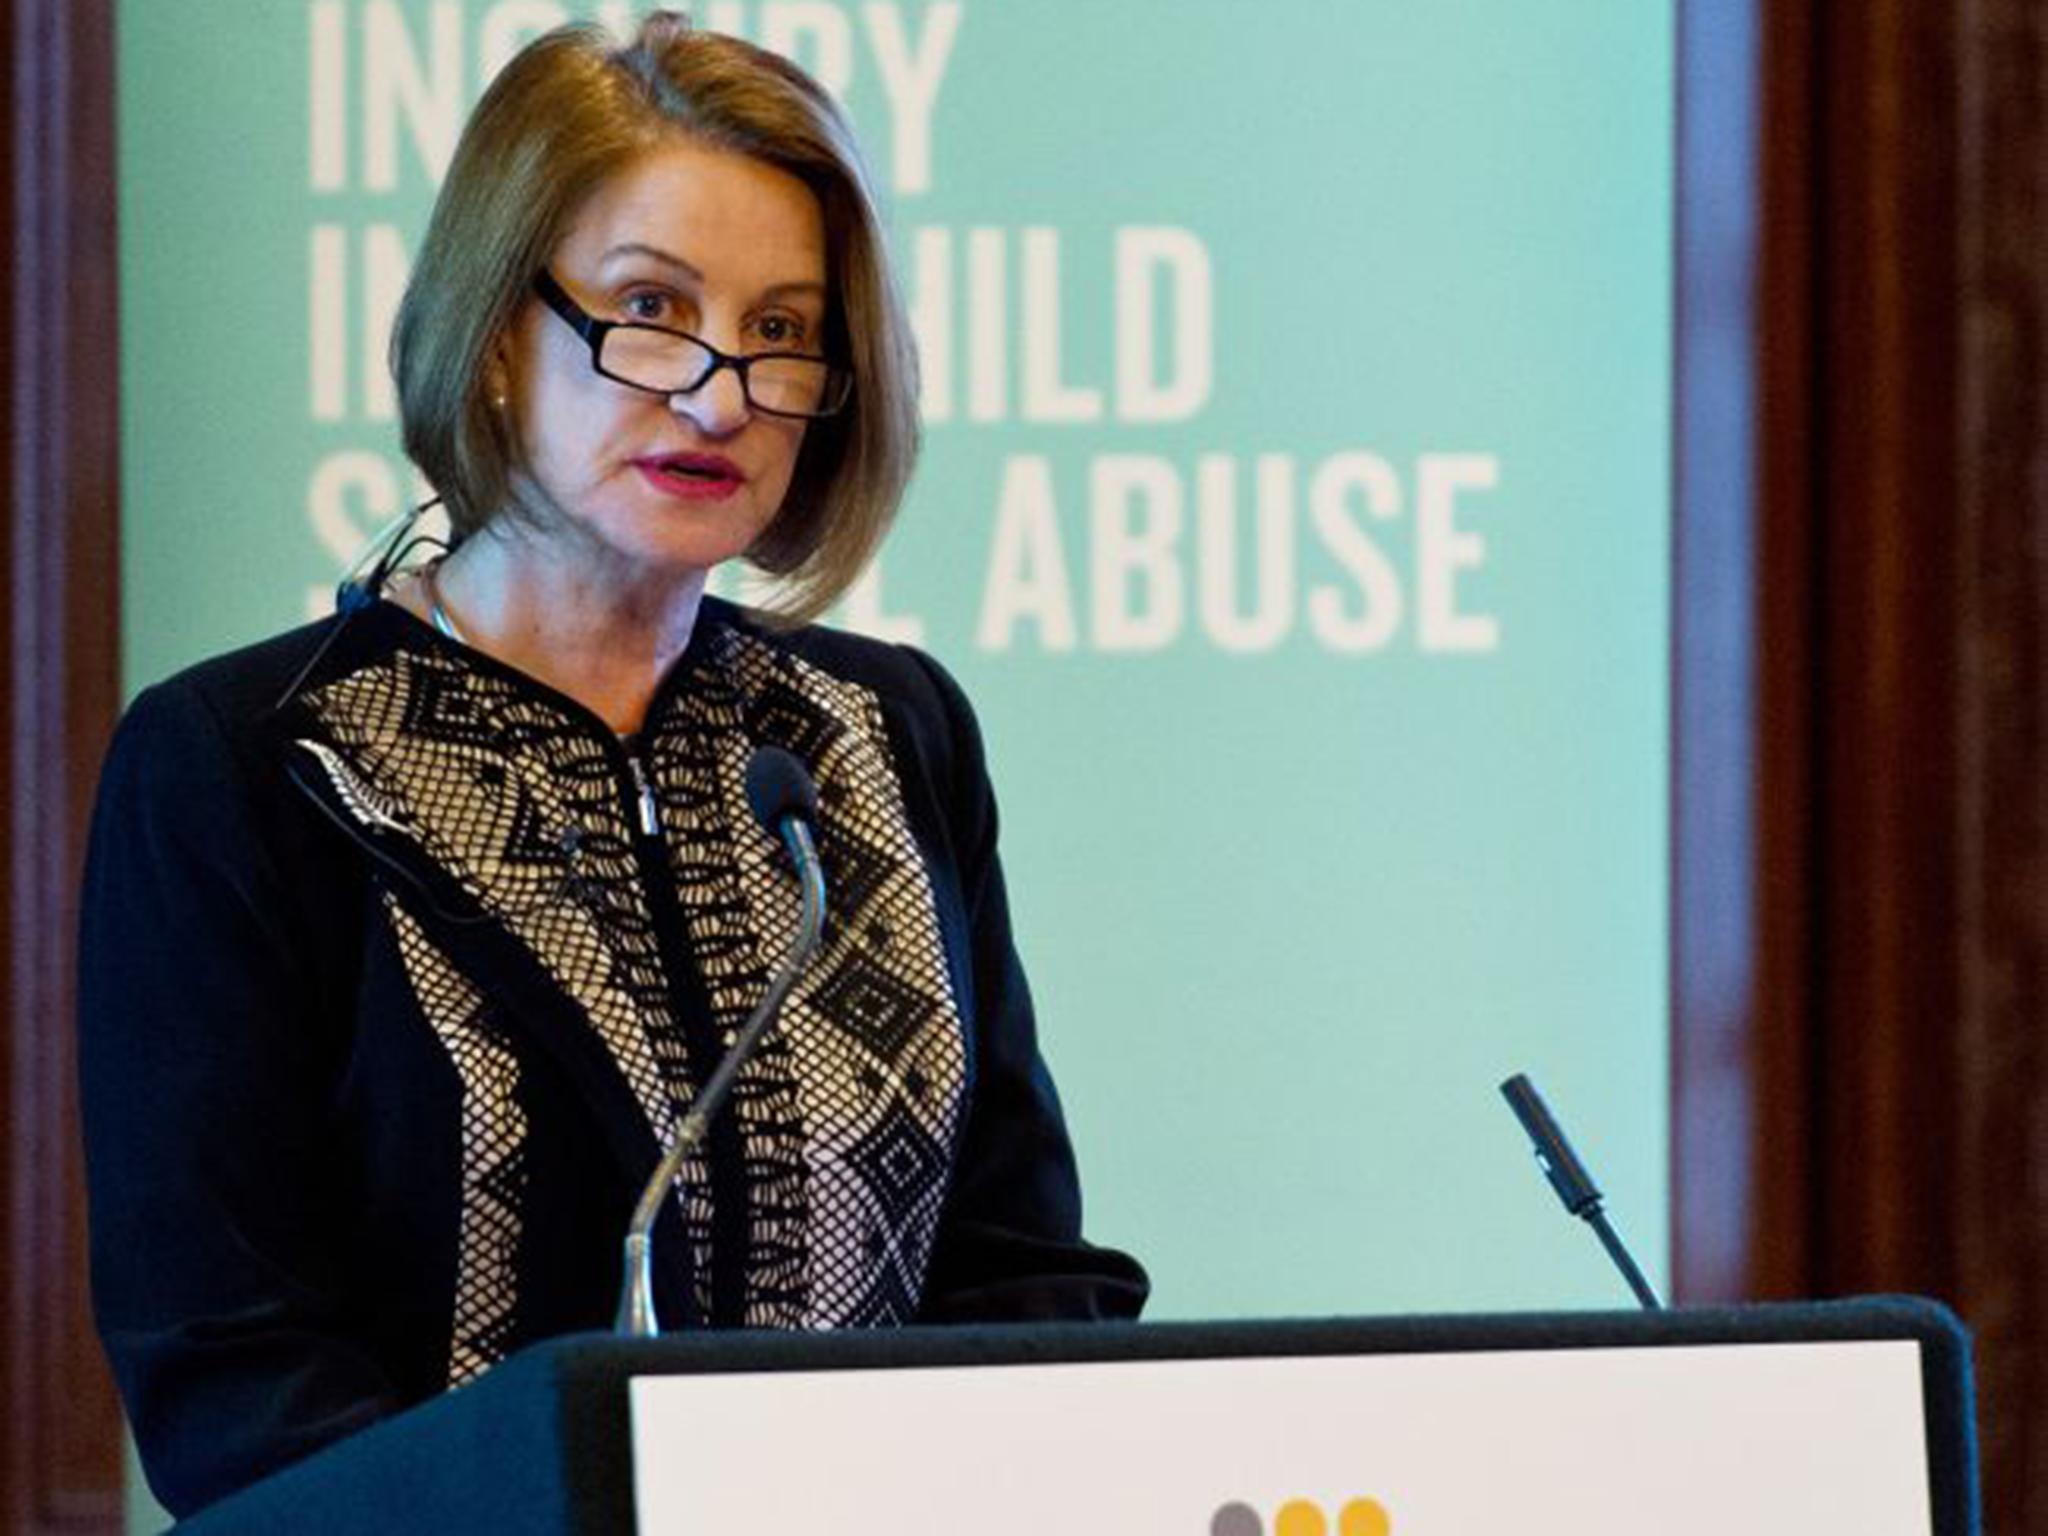 Dame Lowell Goddard is one of three chairs who have stepped down from the child abuse inquiry